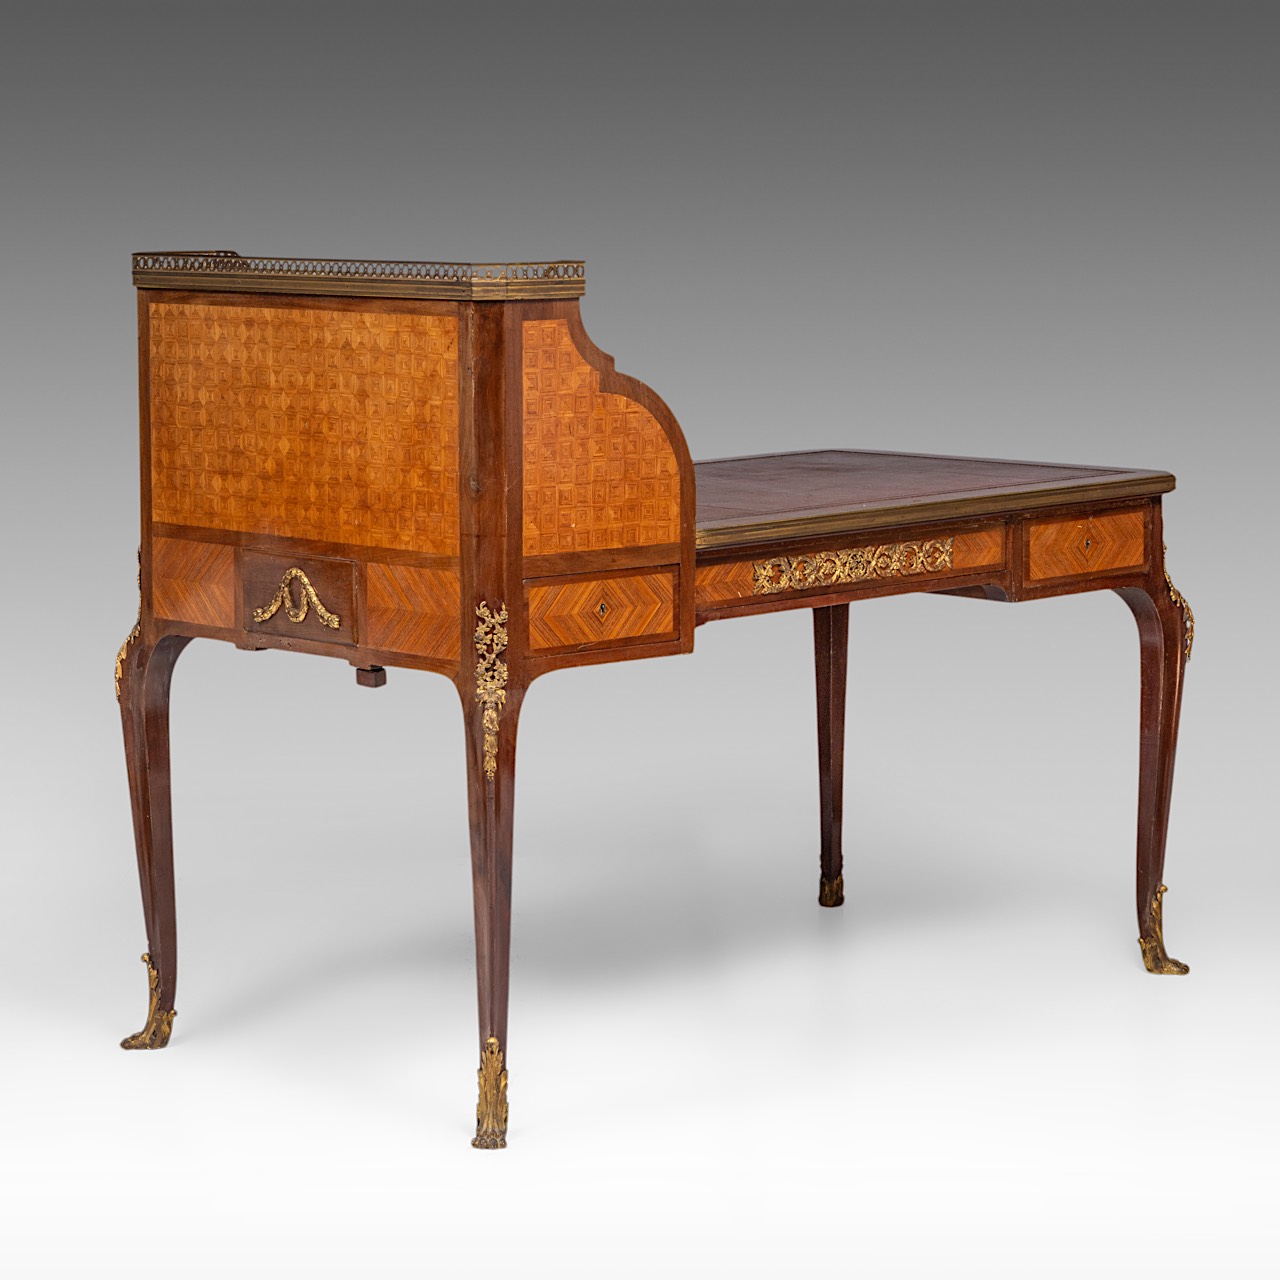 A leather-topped Transitional-style bureau plat and rolltop desk with parquetry and gilt bronze moun - Image 7 of 9